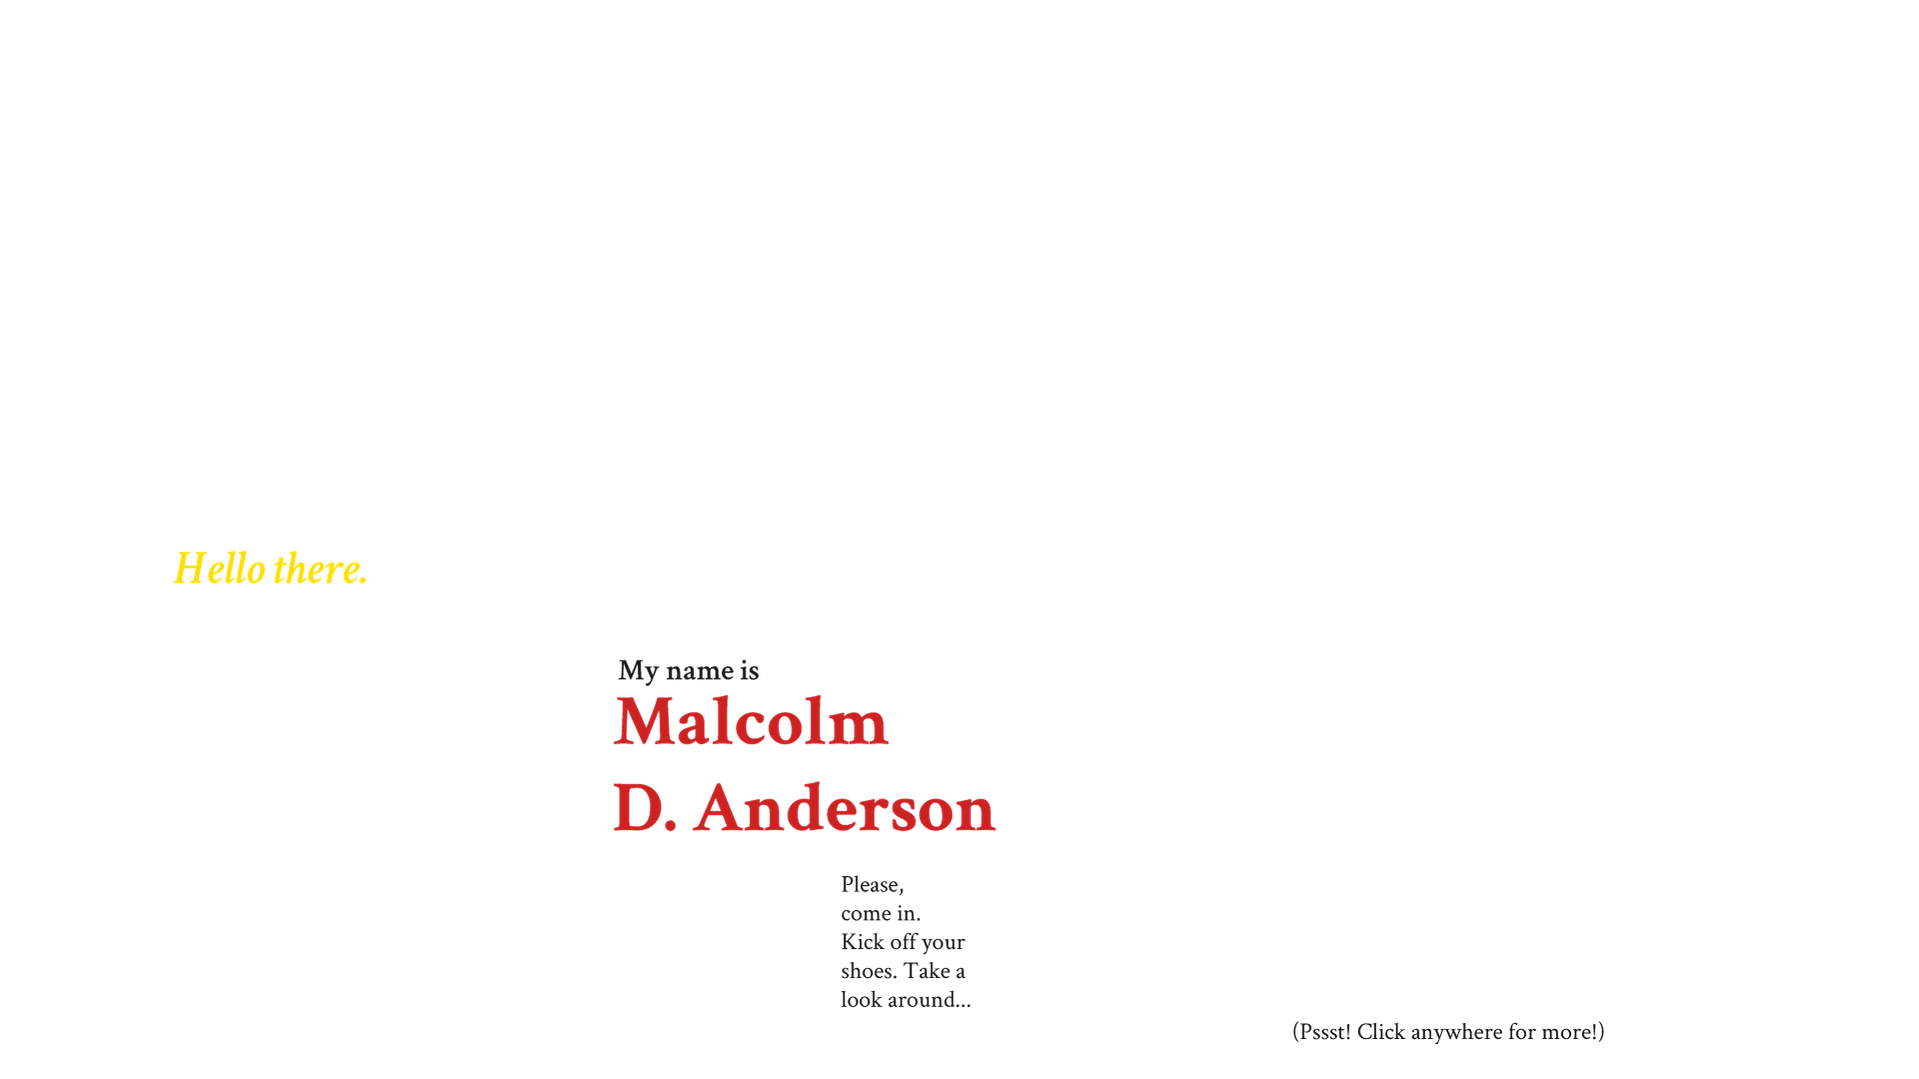 kick your shoes off with Malcolm D. Anderson